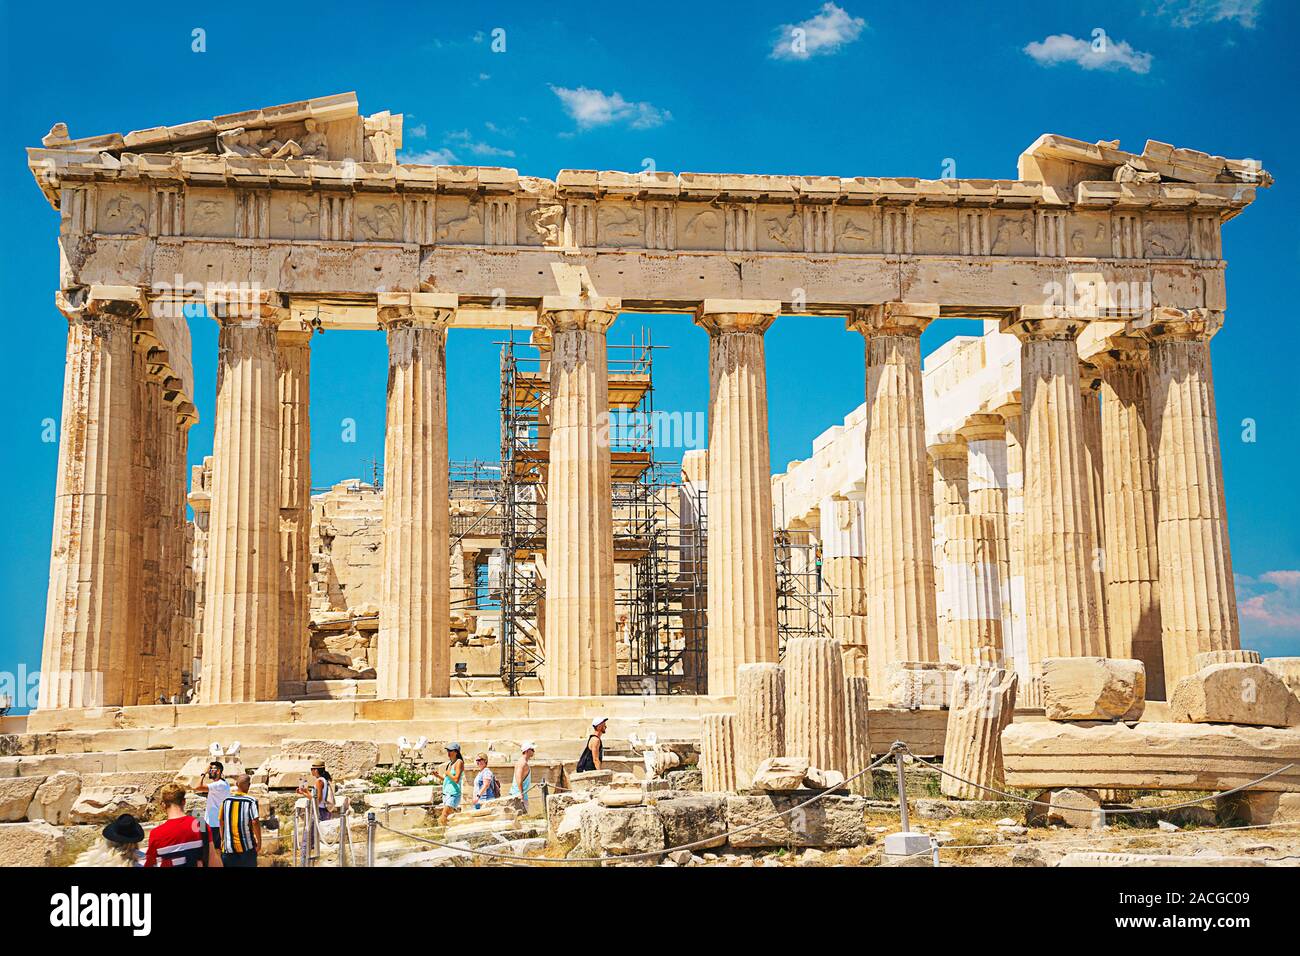 Ancient temple Parthenon in Acropolis Athens Greece on a bright blue sky background. The best travel destinations. Stock Photo